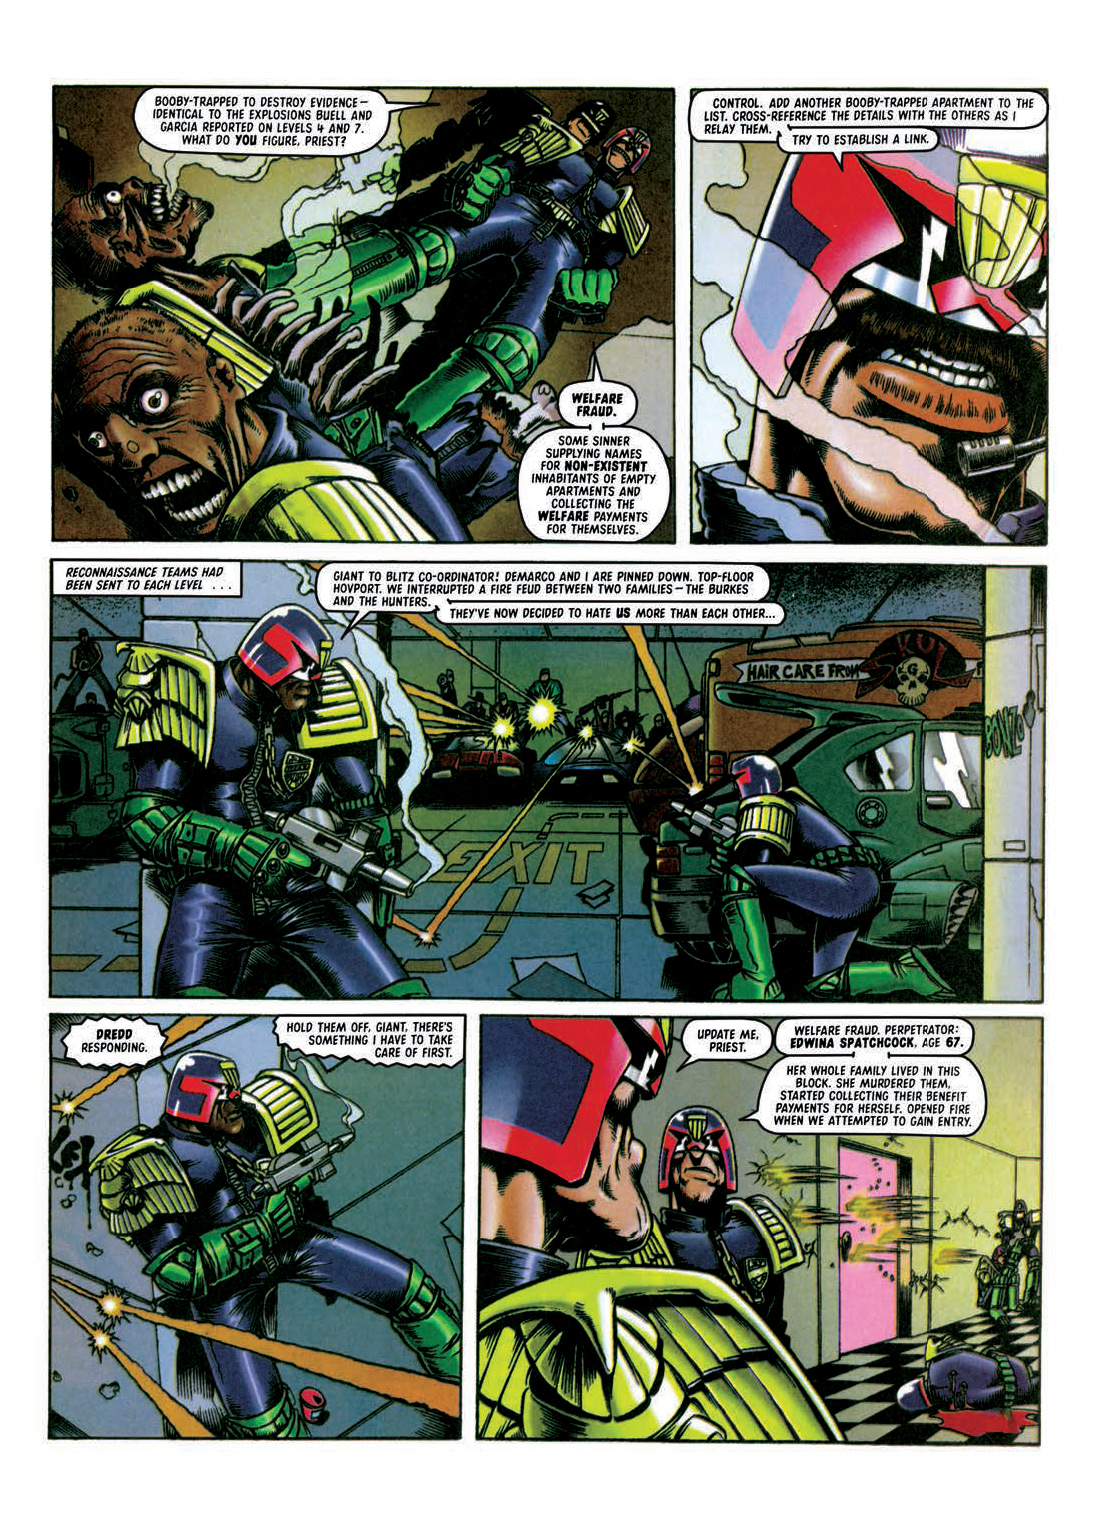 Read online Judge Dredd: The Restricted Files comic -  Issue # TPB 4 - 200